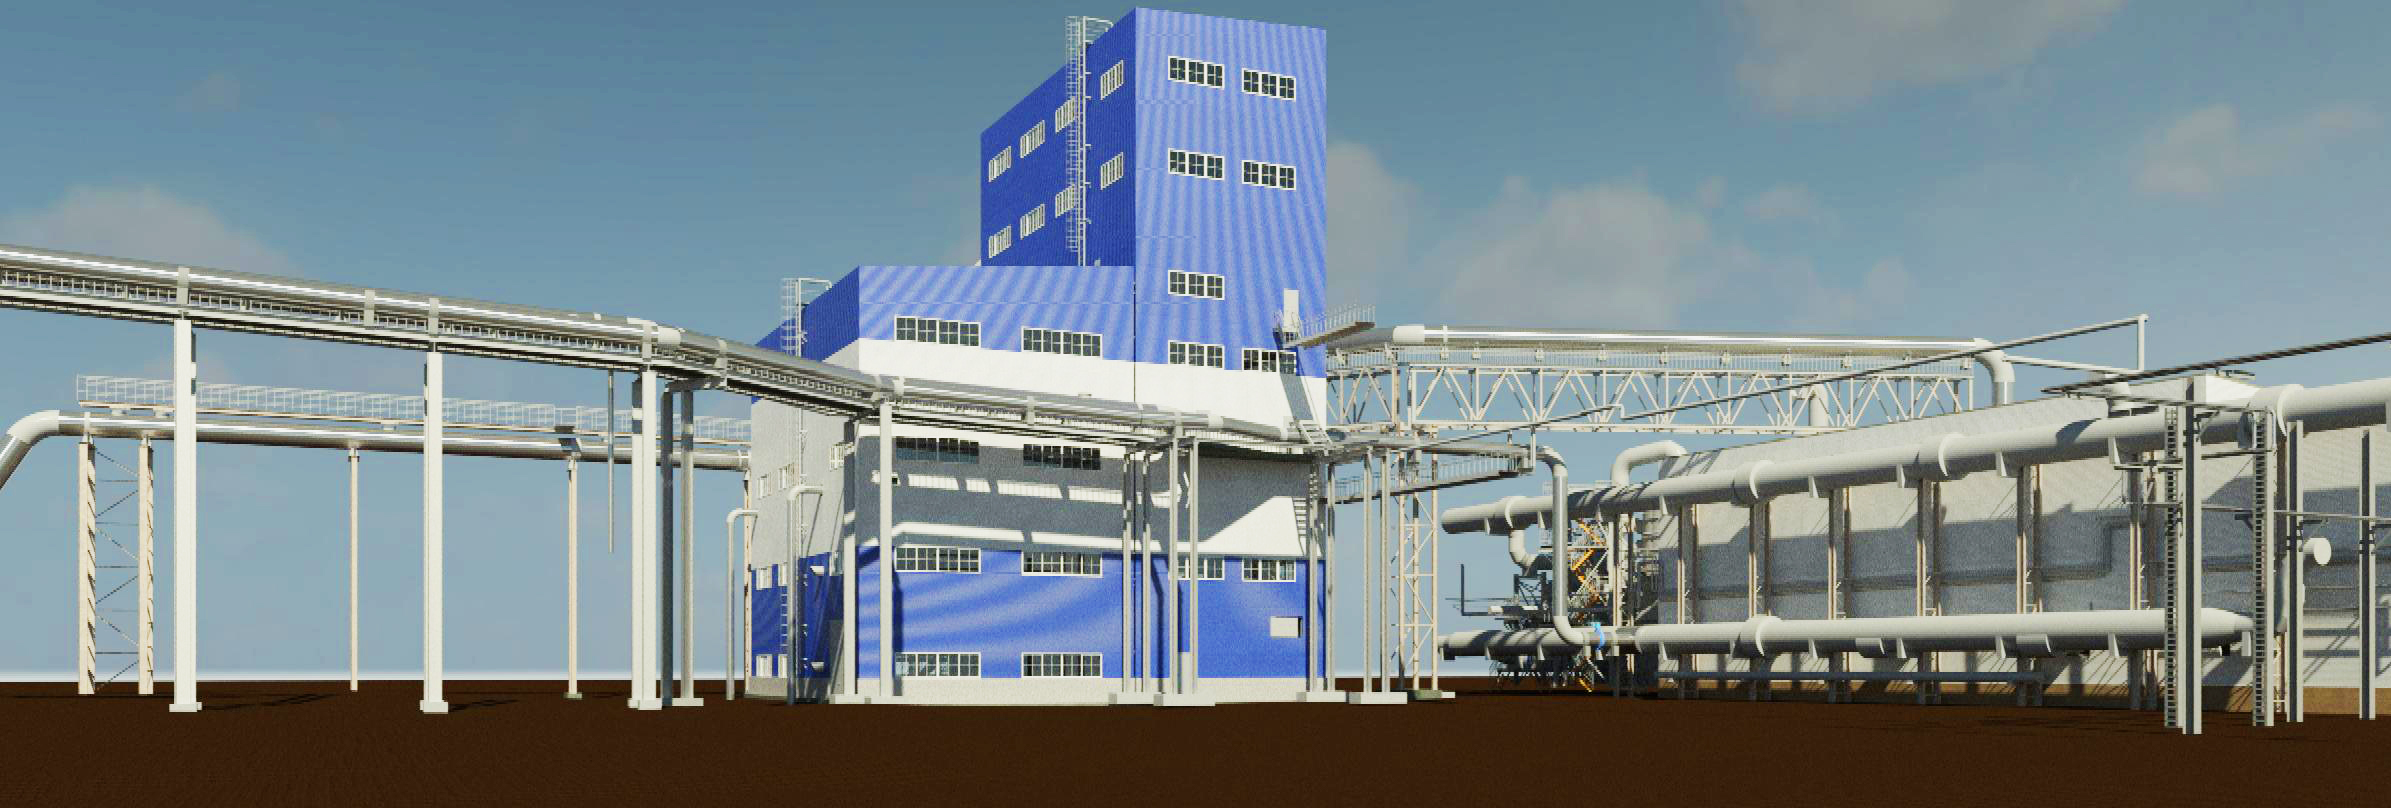 3D scanning and 3D/BIM modeling of industrial facilities